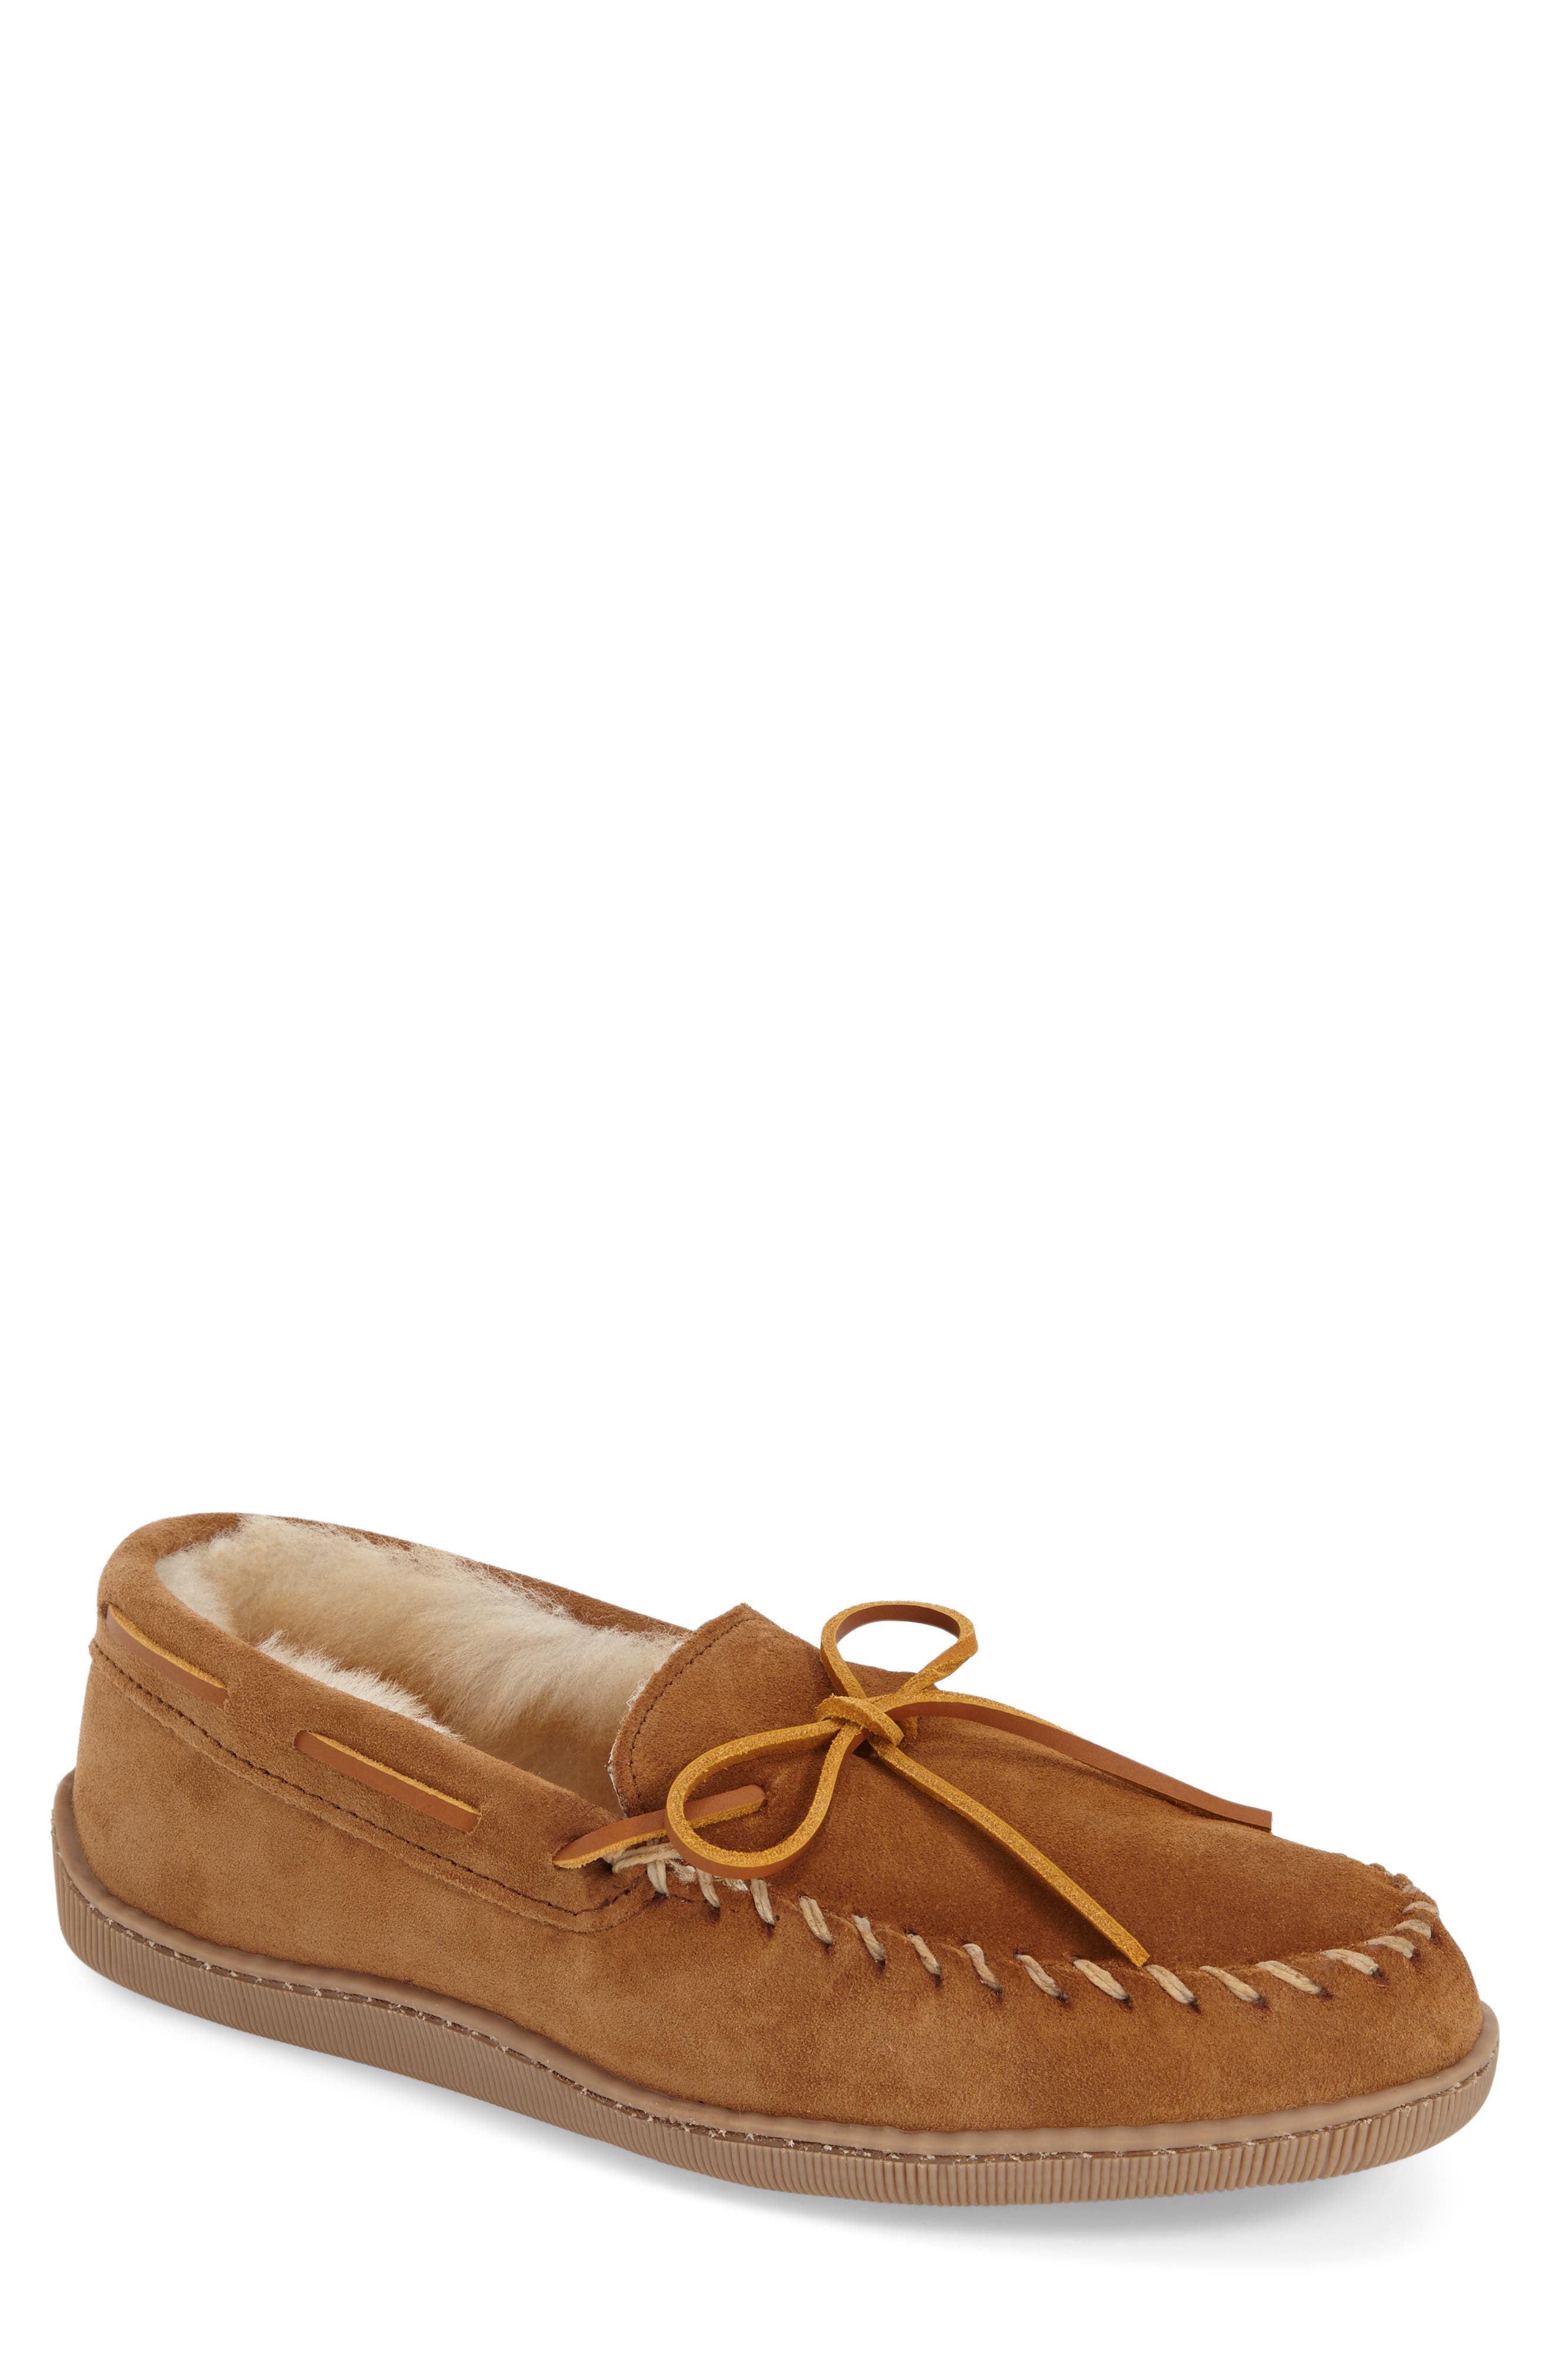 firetrap moccasin slippers mens